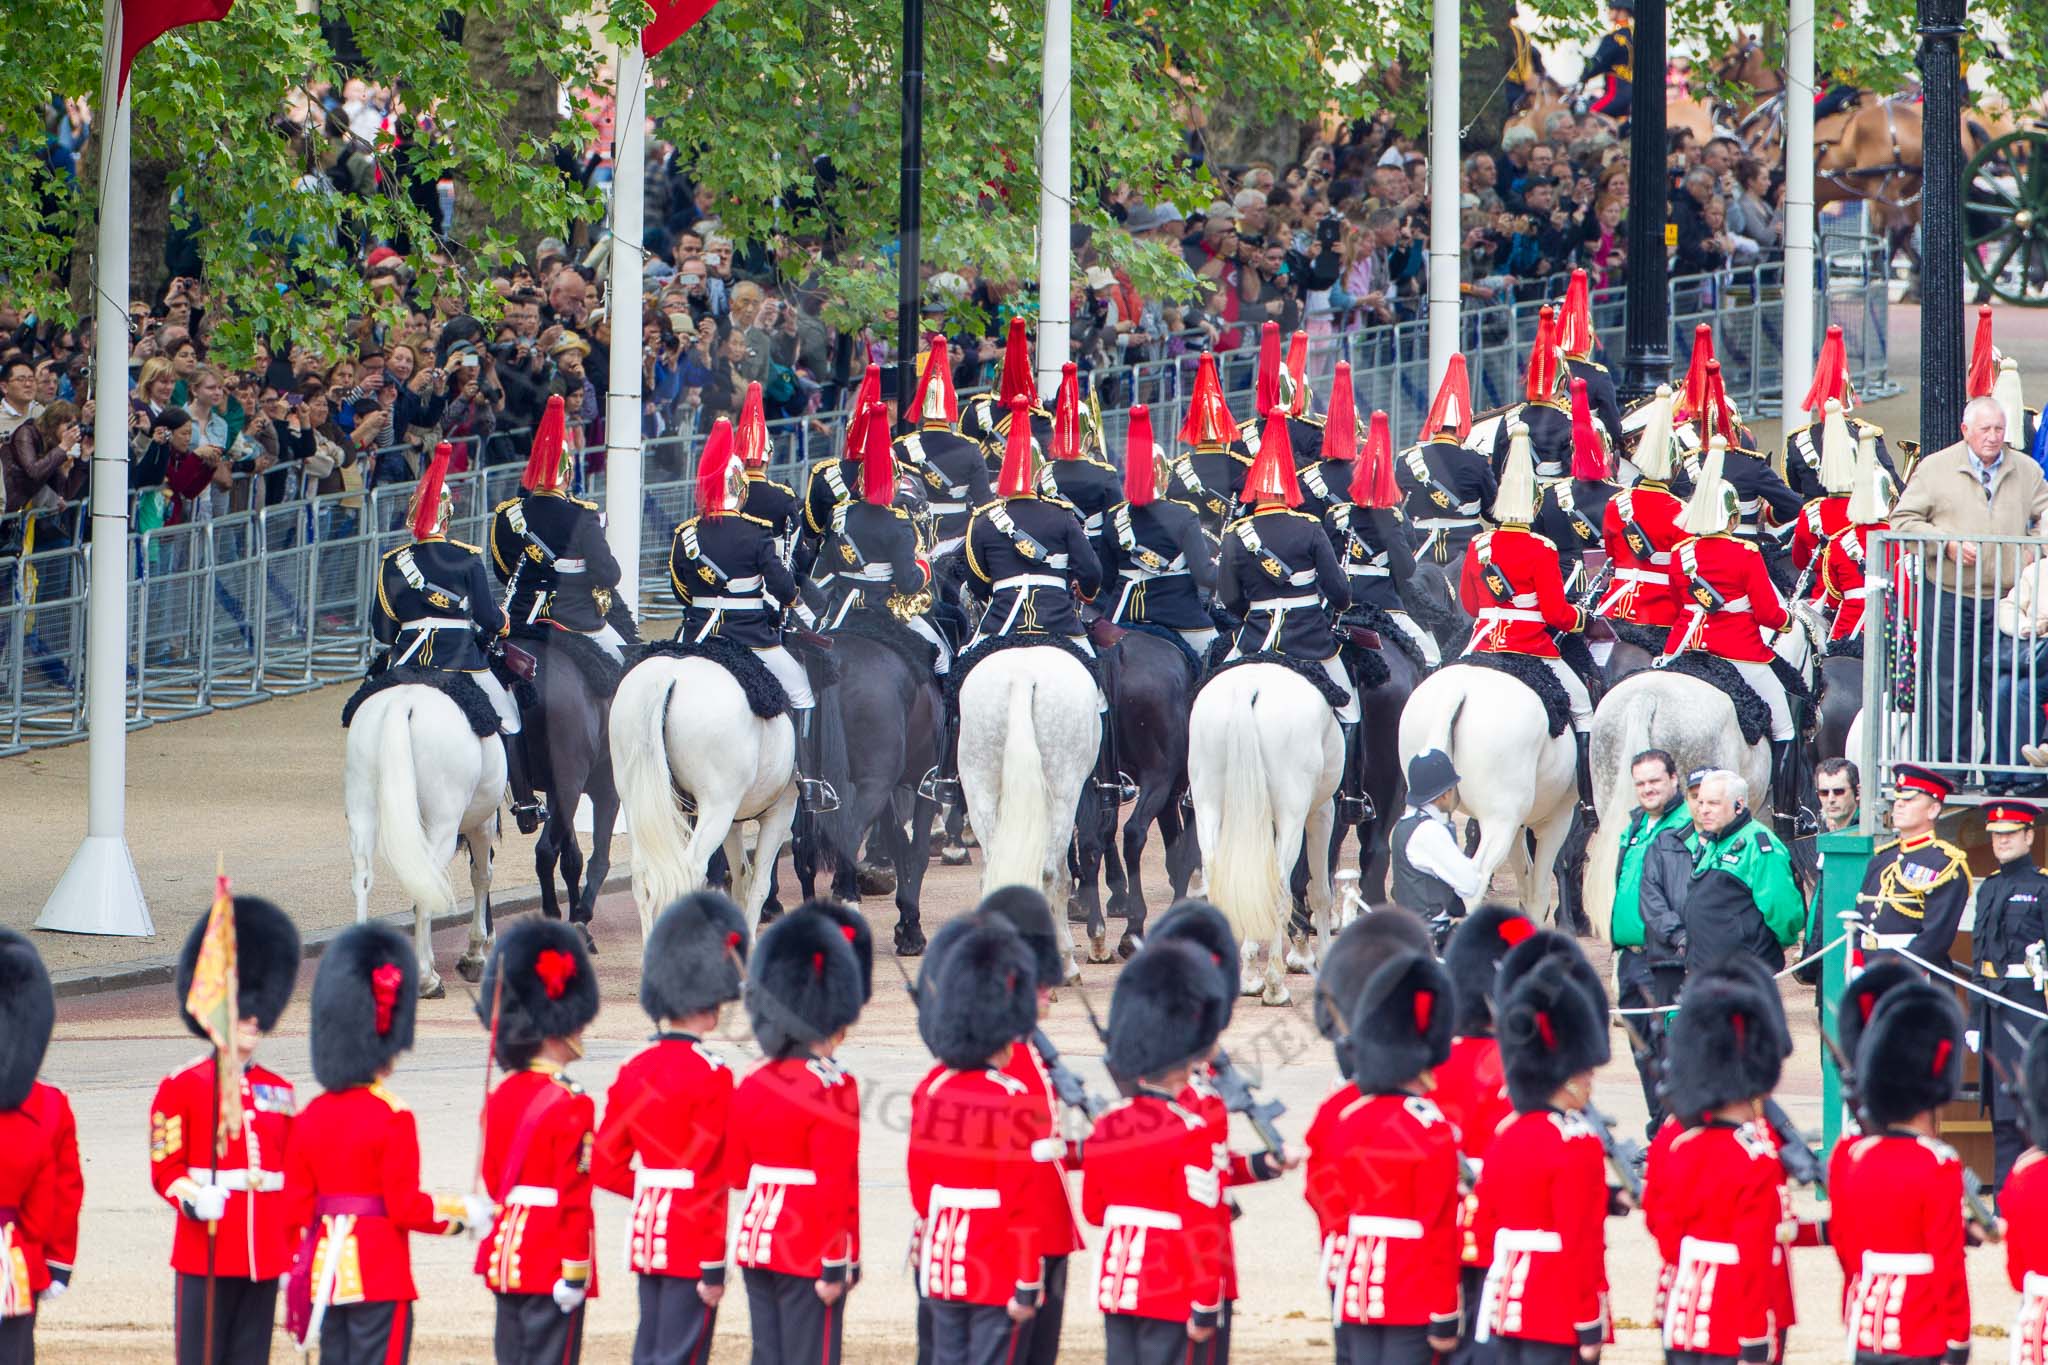 Major General's Review 2013: The Mounted Bands of the Household Cavalry are ready to leave, they follow the Royal Horse Artillery to march off via The Mall..
Horse Guards Parade, Westminster,
London SW1,

United Kingdom,
on 01 June 2013 at 12:02, image #679